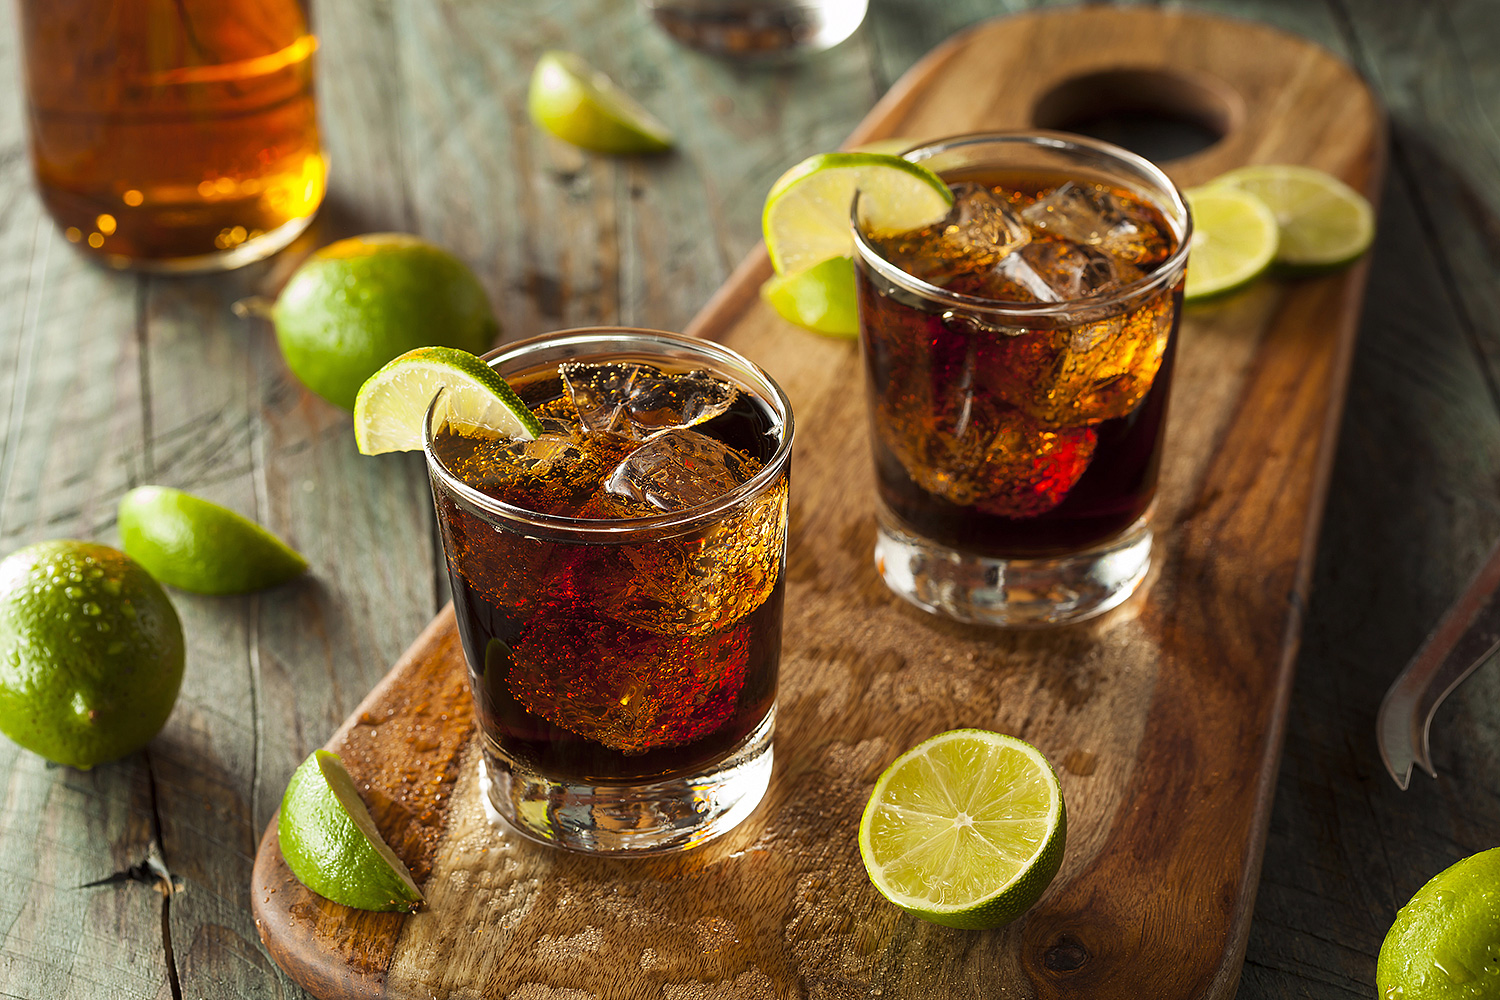 Cuba Libre cocktails from a wooden board garnished with limes